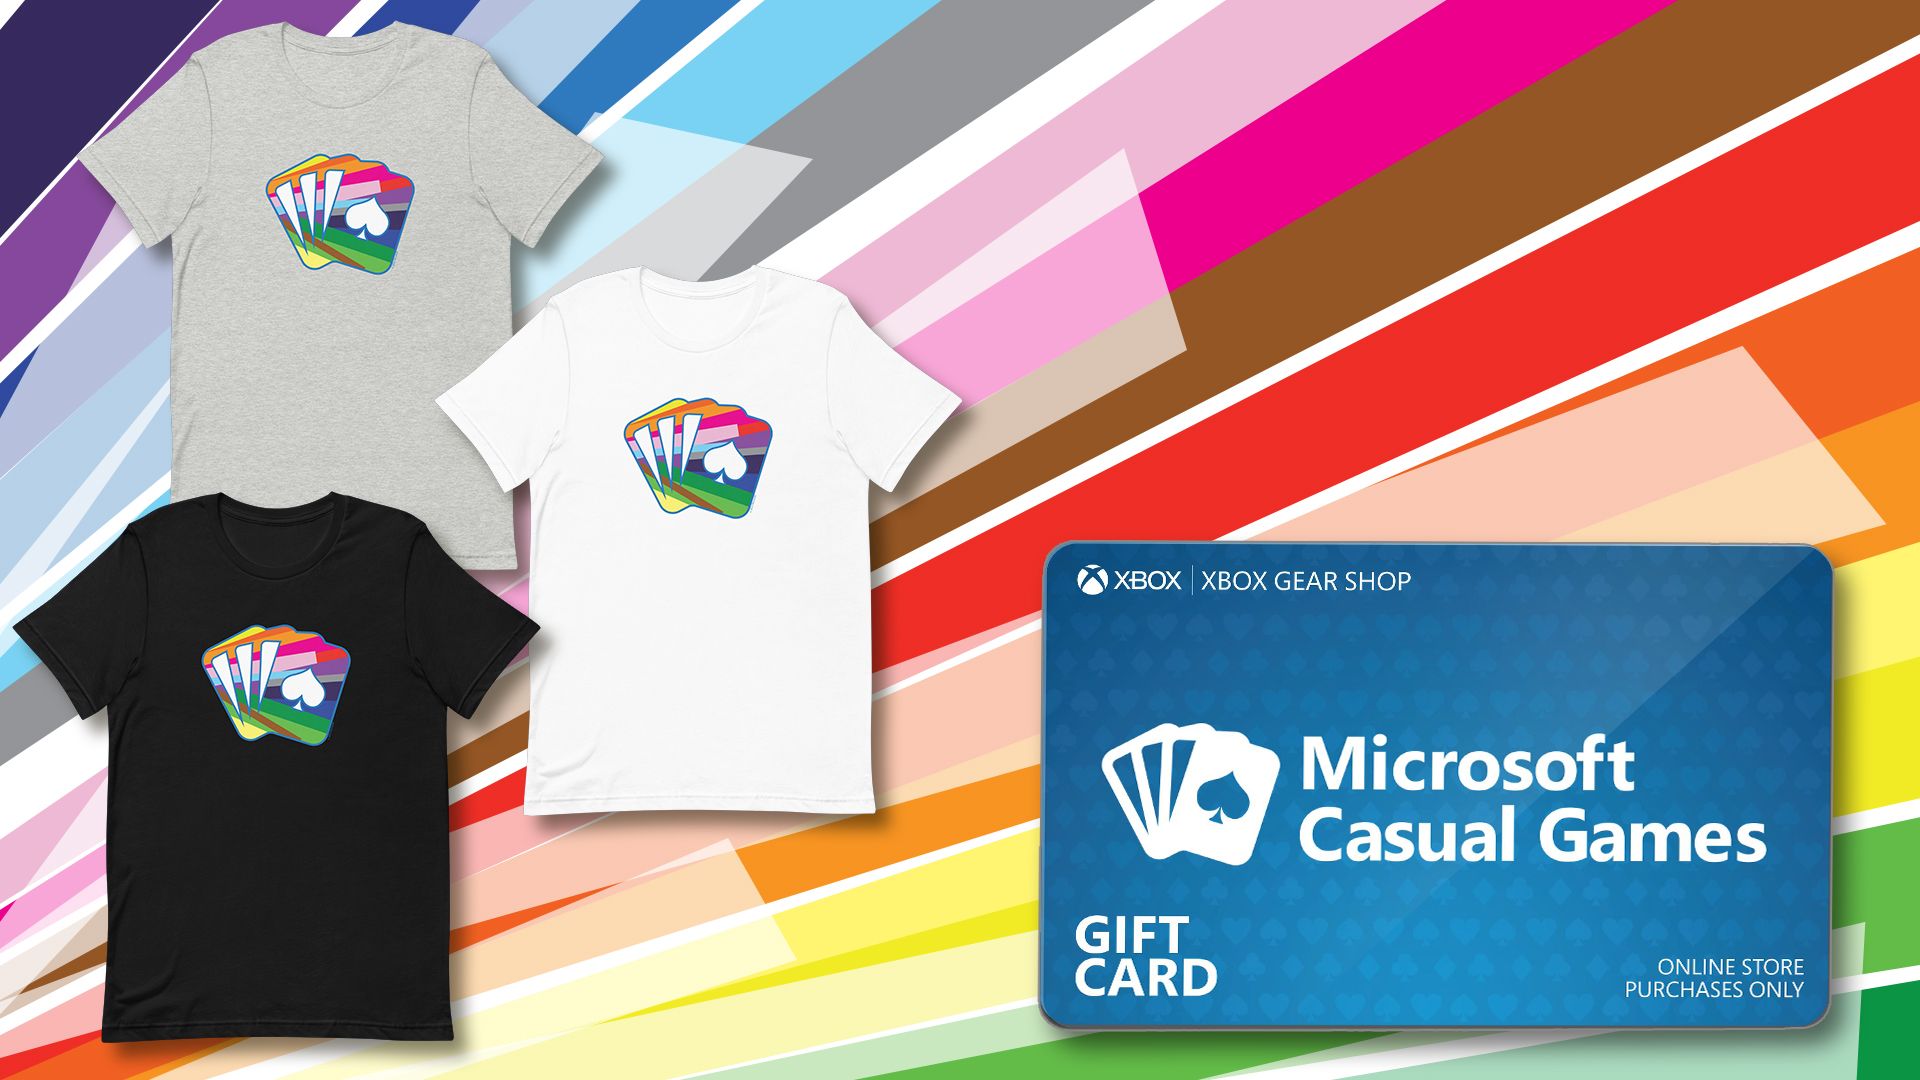 The background is filled with angled rays of colors. 3 t-shirts are displayed on the left in black, grey, and white with the new Microsoft Causal Games pride logo. An Xbox Gear Shop gift card is on the right.